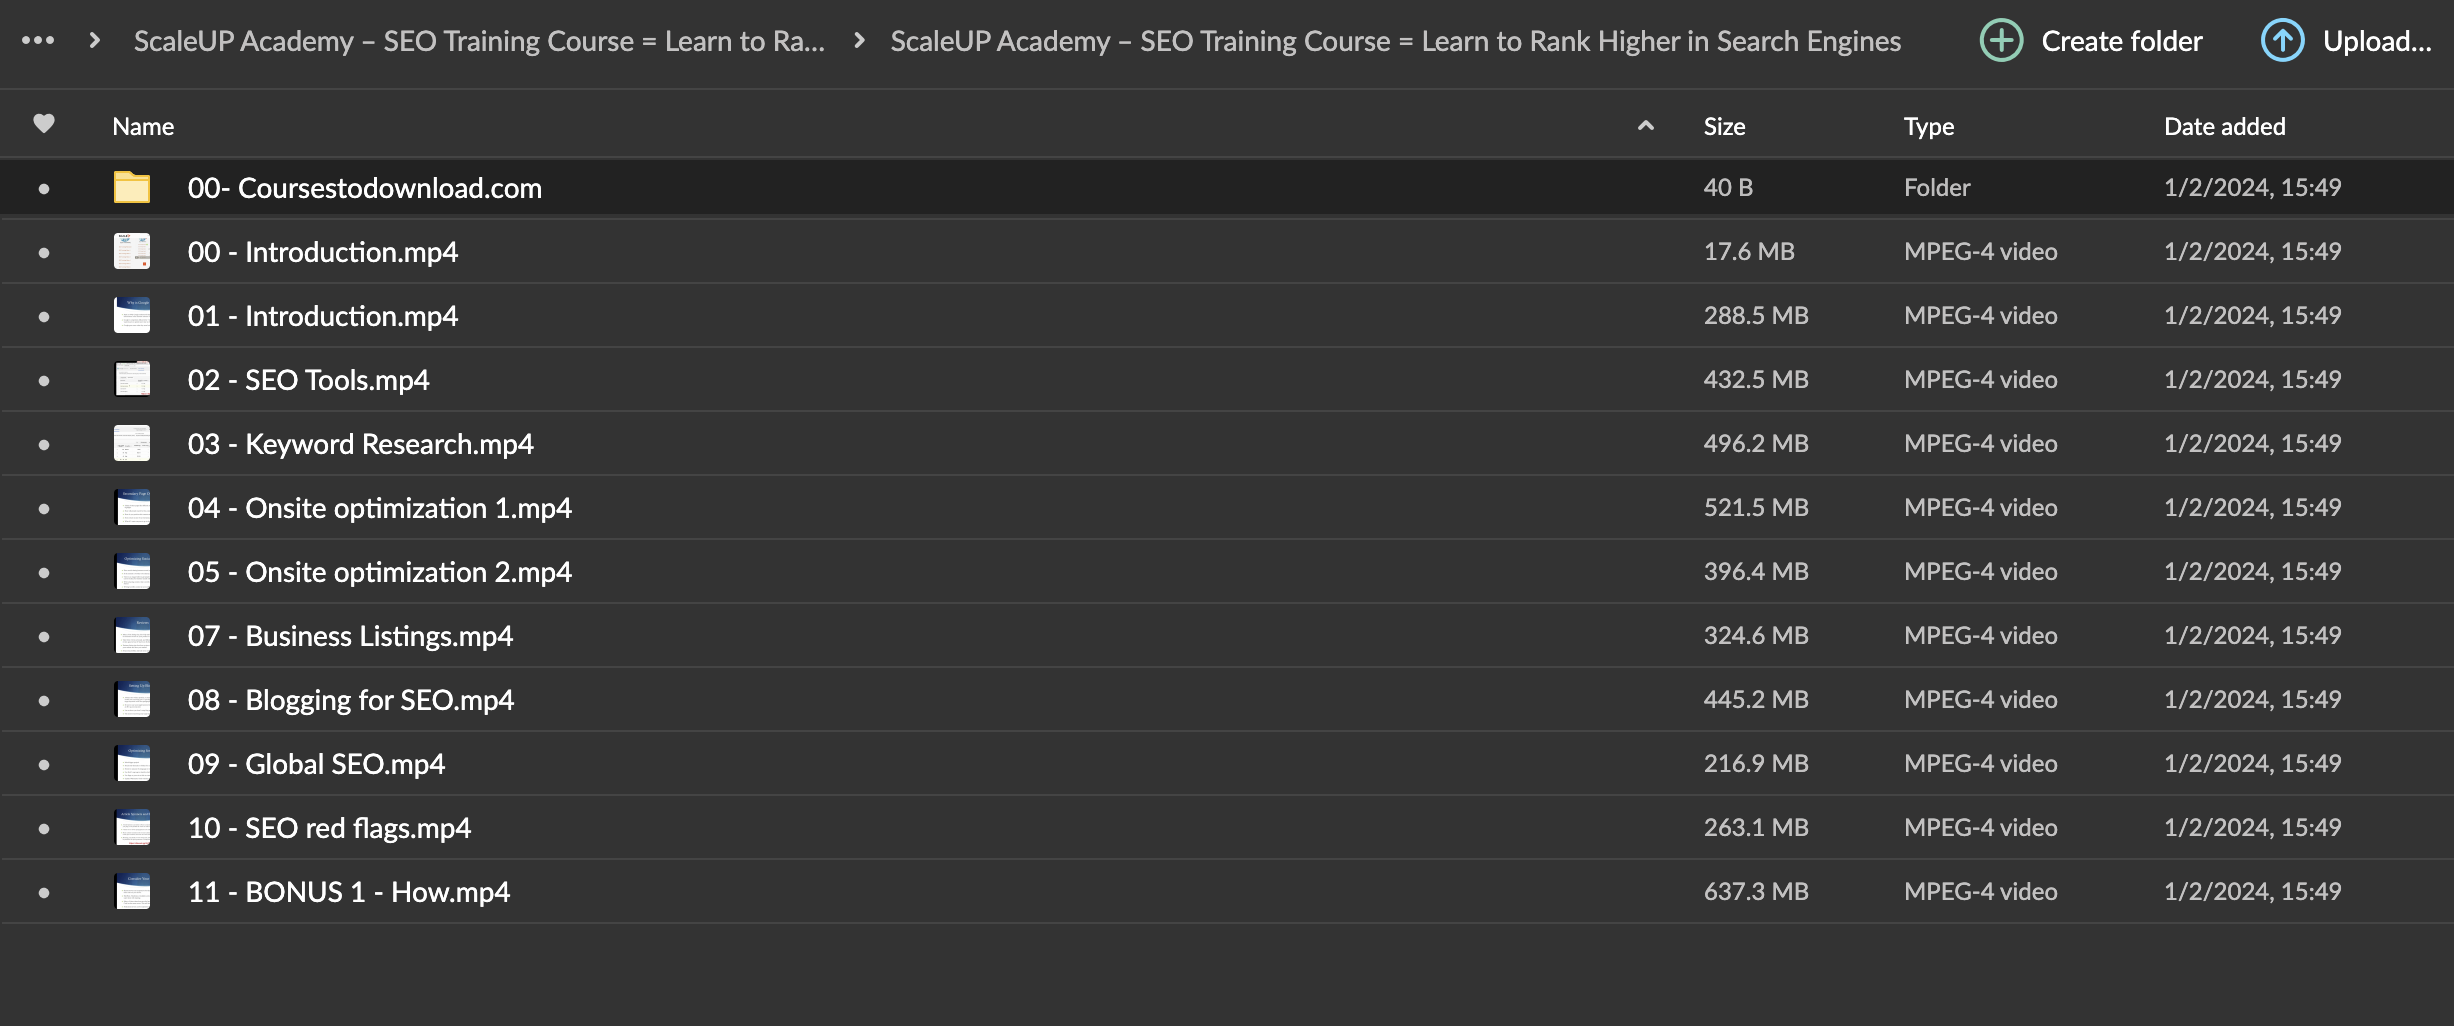 ScaleUP Academy – SEO Training Course = Learn to Rank Higher in Search Engines Download